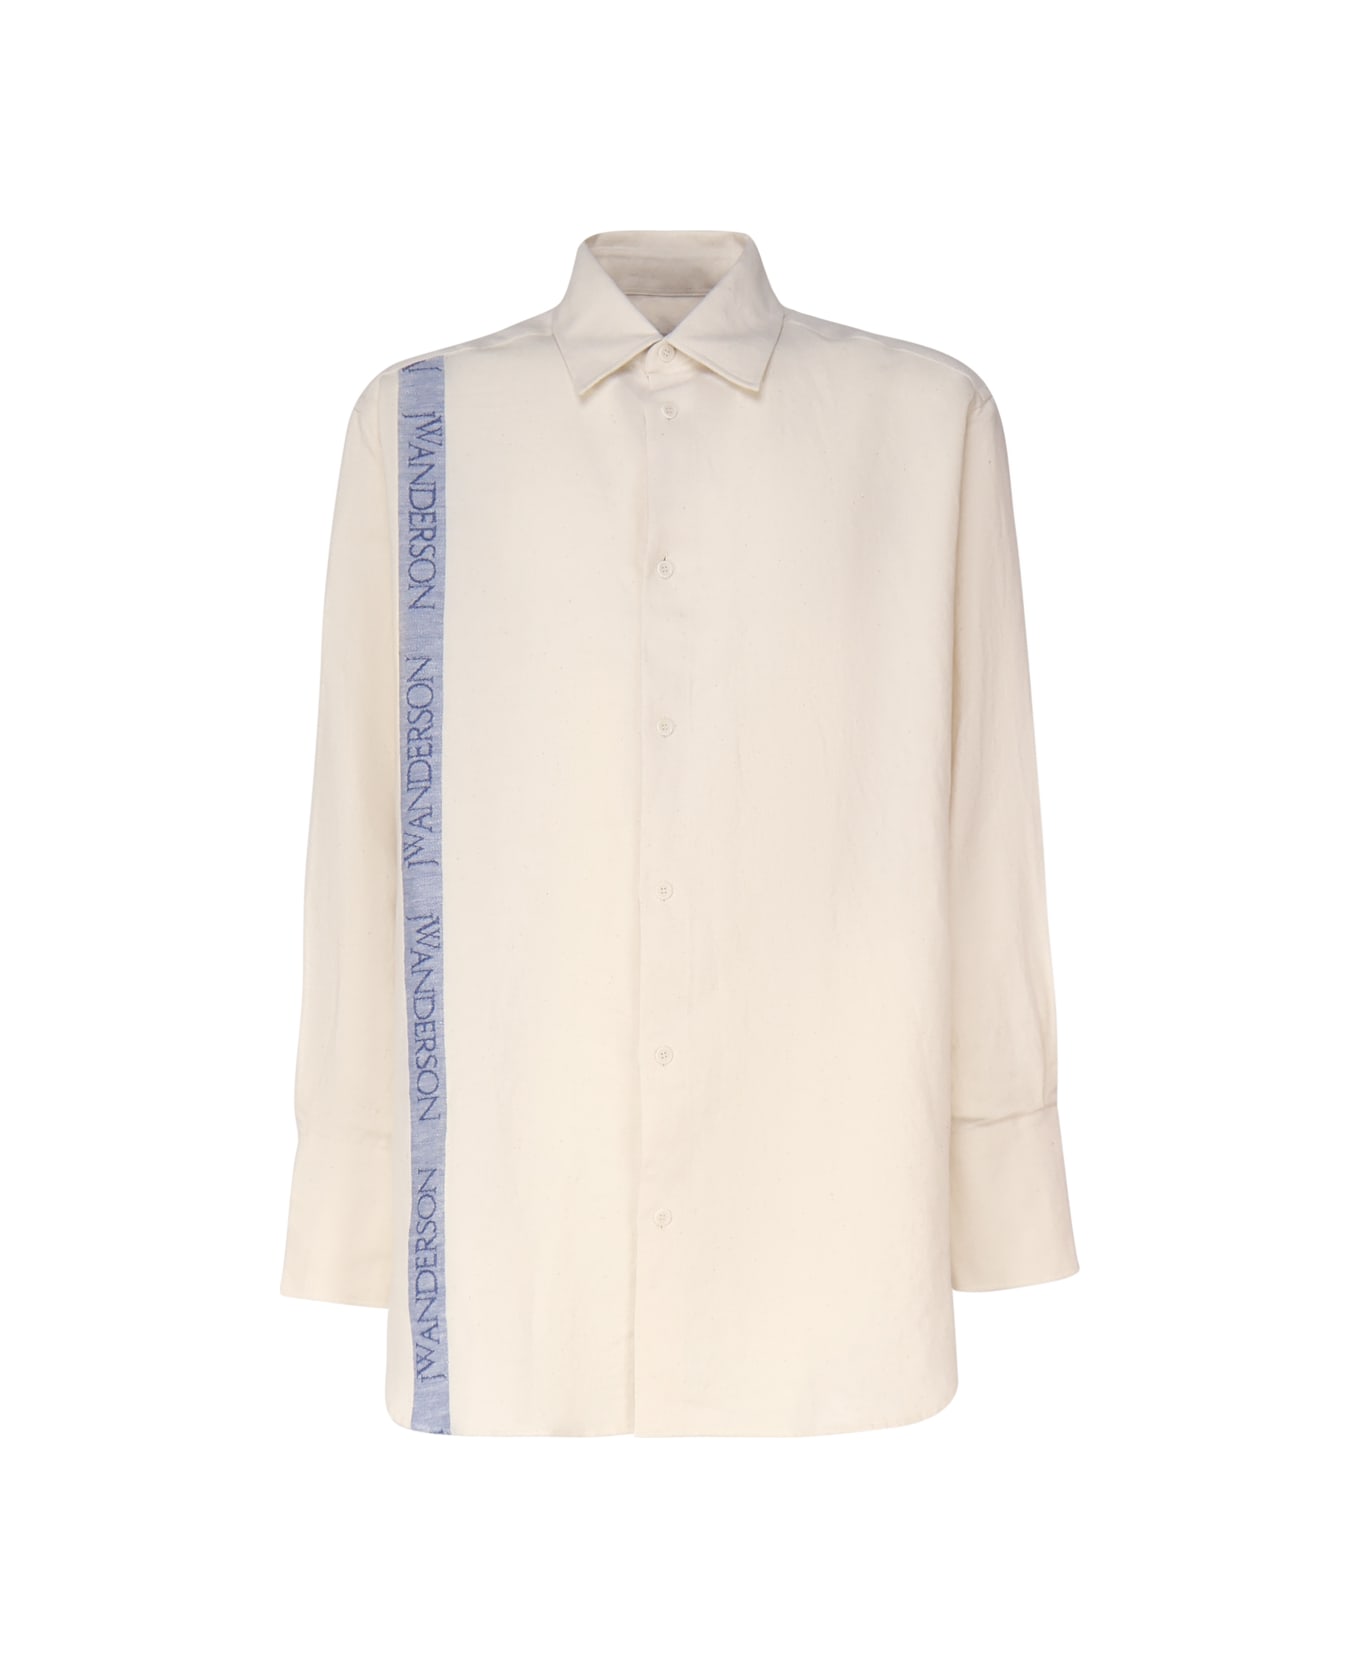 J.W. Anderson Shirt With Anchor Embroidery - Ivory シャツ